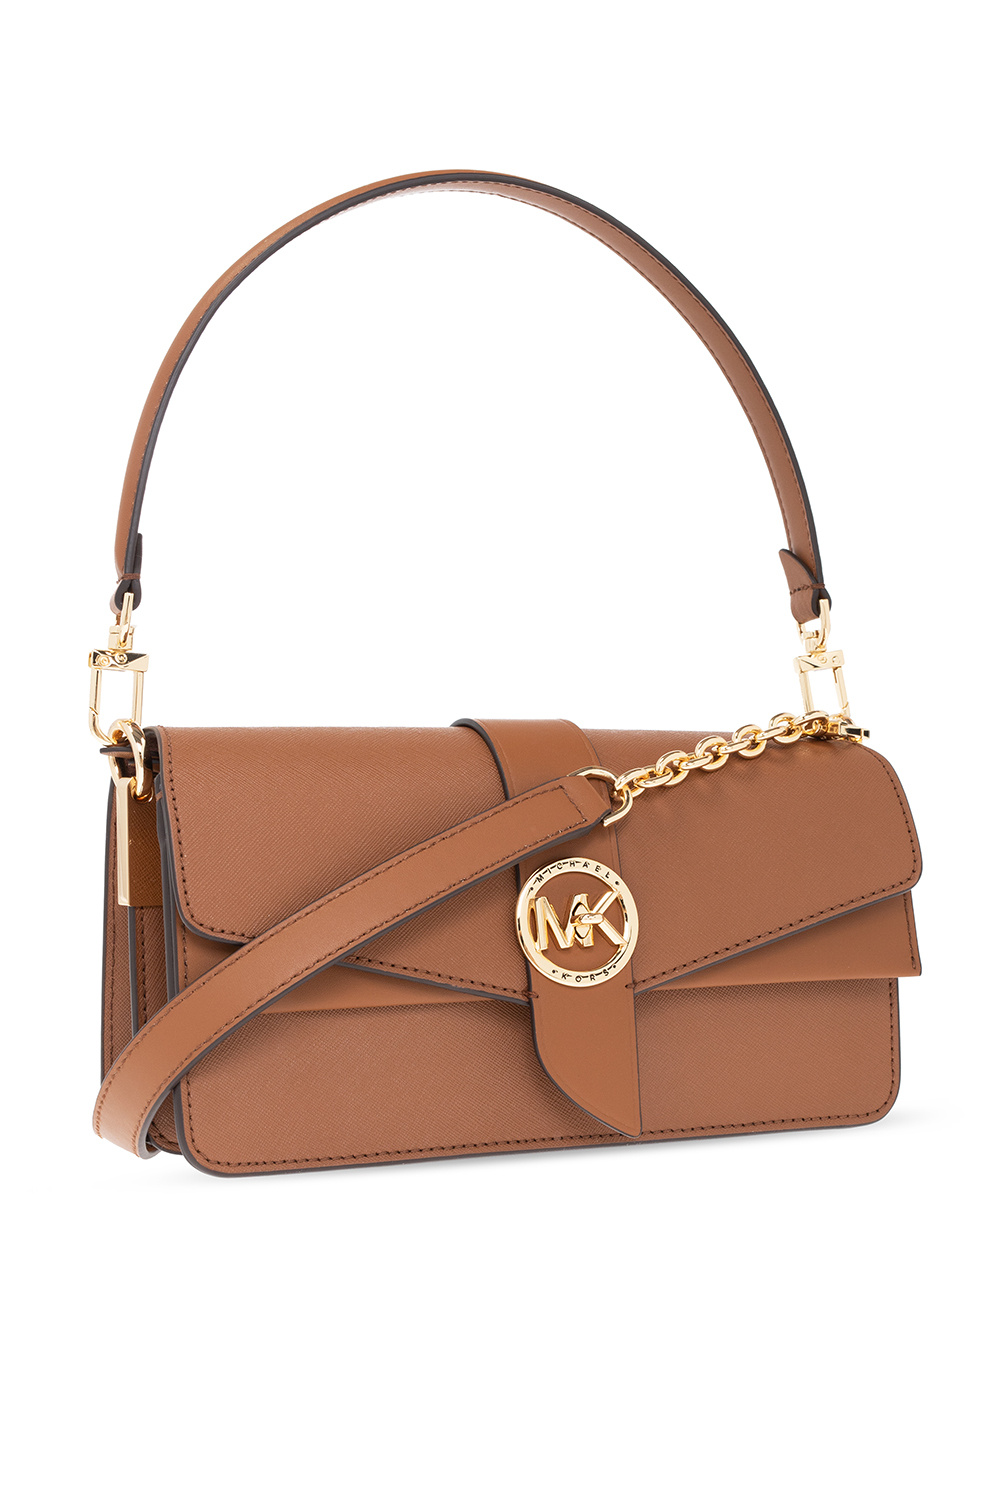 Michael Kors Medium Greenwich Shoulder Bag In Saffiano Leather in Brown